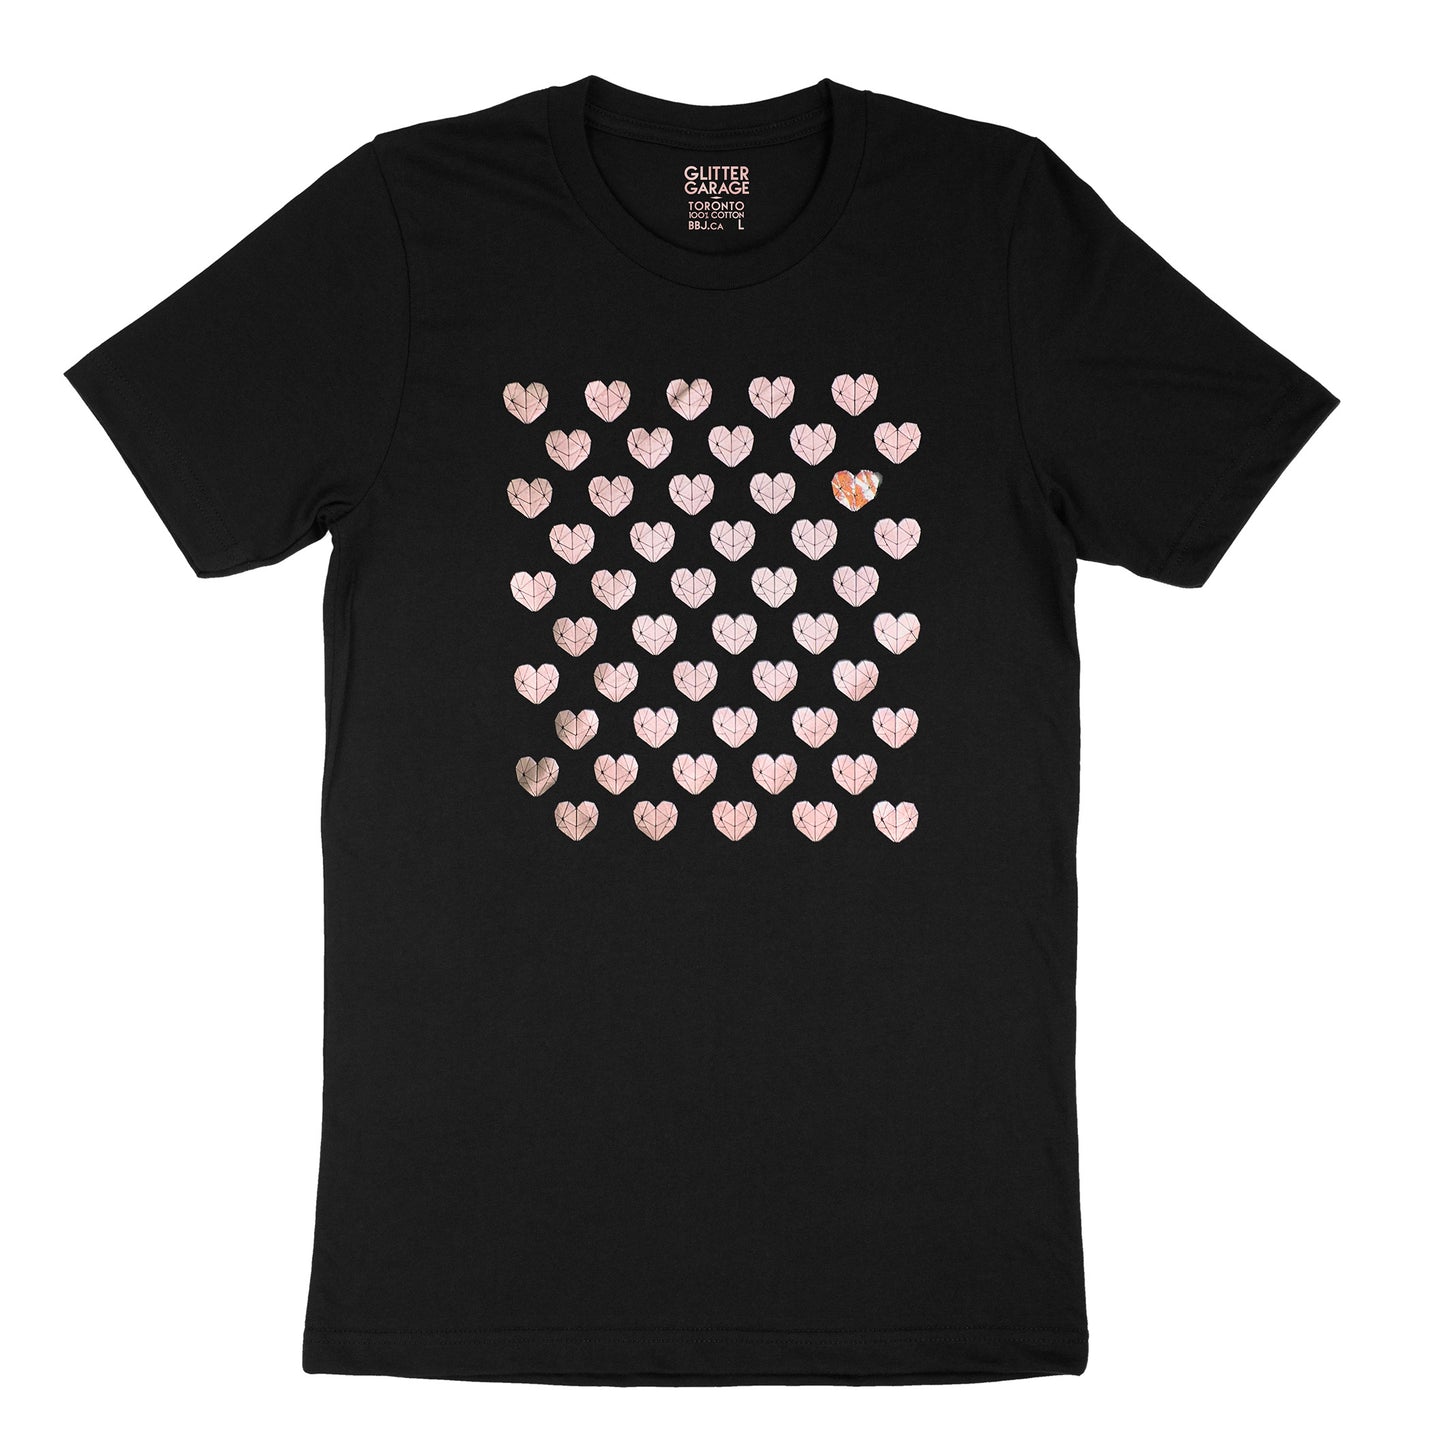 Many Hearts customizable tee - black unisex tee with 50 hearts  - rose gold metallic, holo pearl by BBJ / Glitter Garage